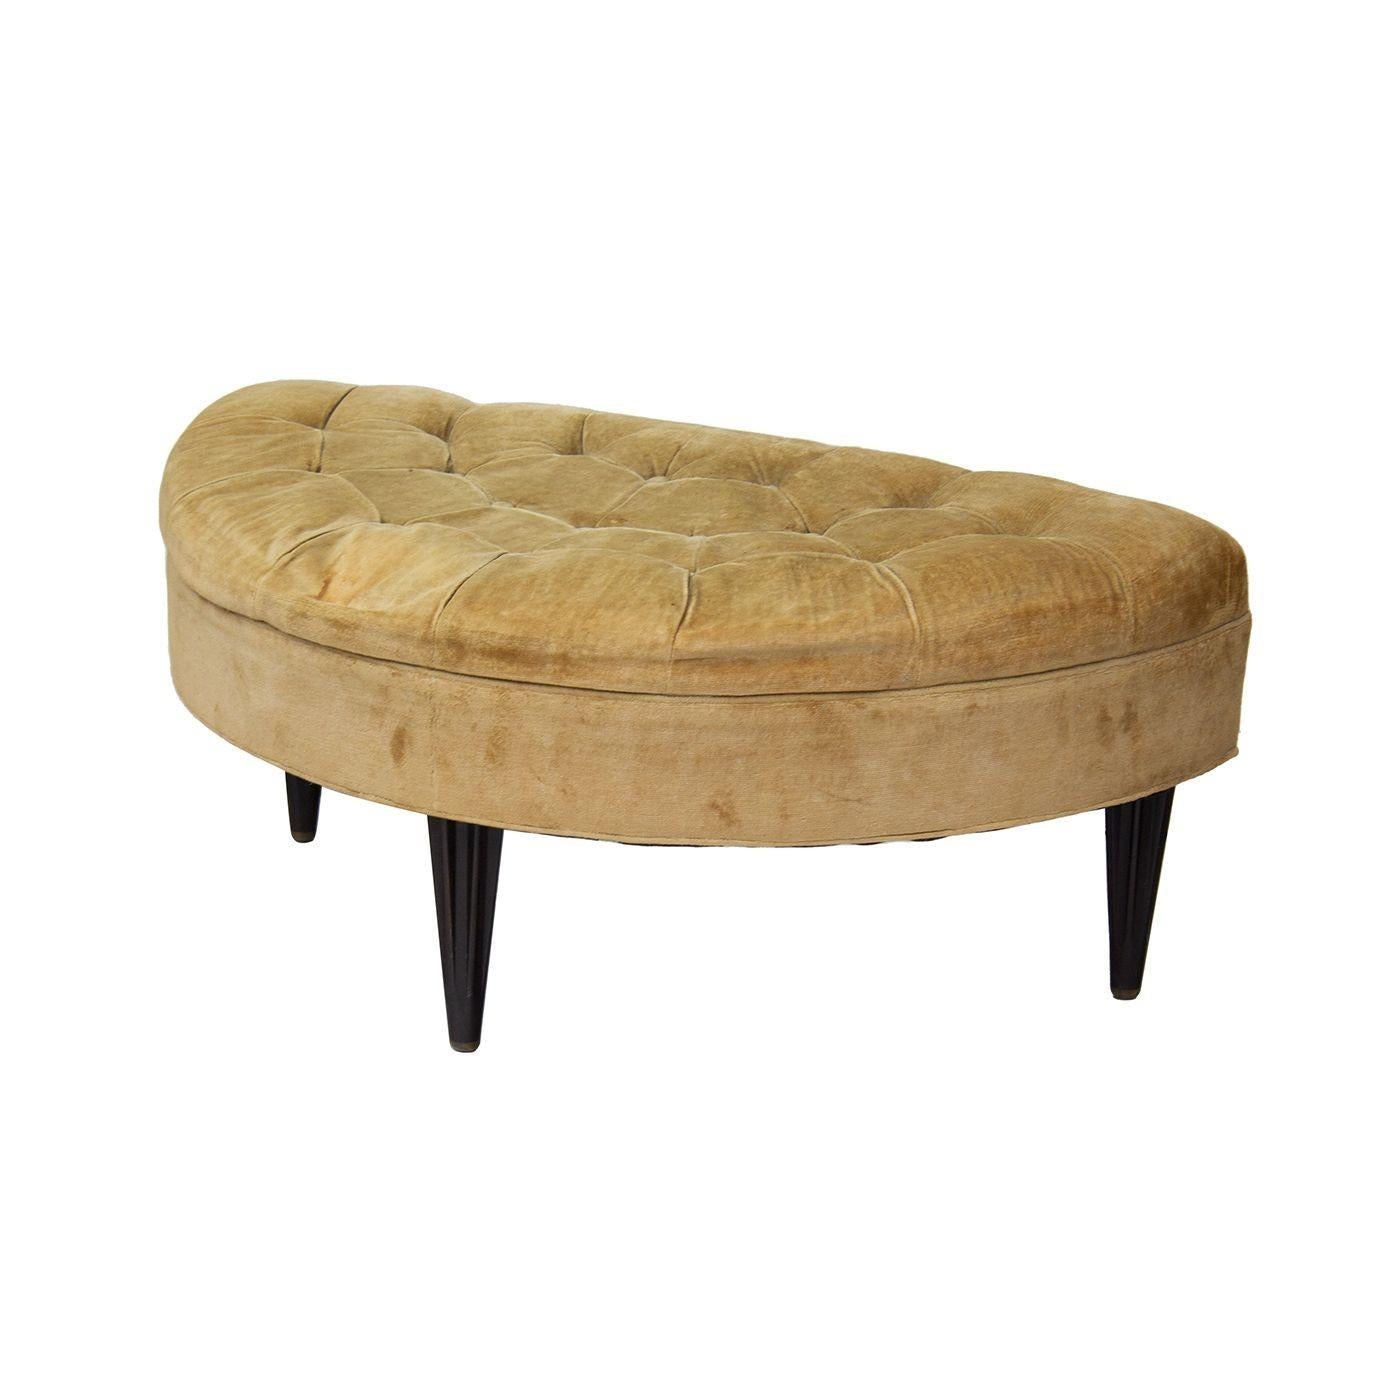 USA, 1950s
Beautiful demilune ottoman by Dunbar. The legs on this piece are really the star- they are shaped / sculpted and each ends in a golden tip. The top is in its original tufted velvet. The foam is hardened and this piece needs new upholstery